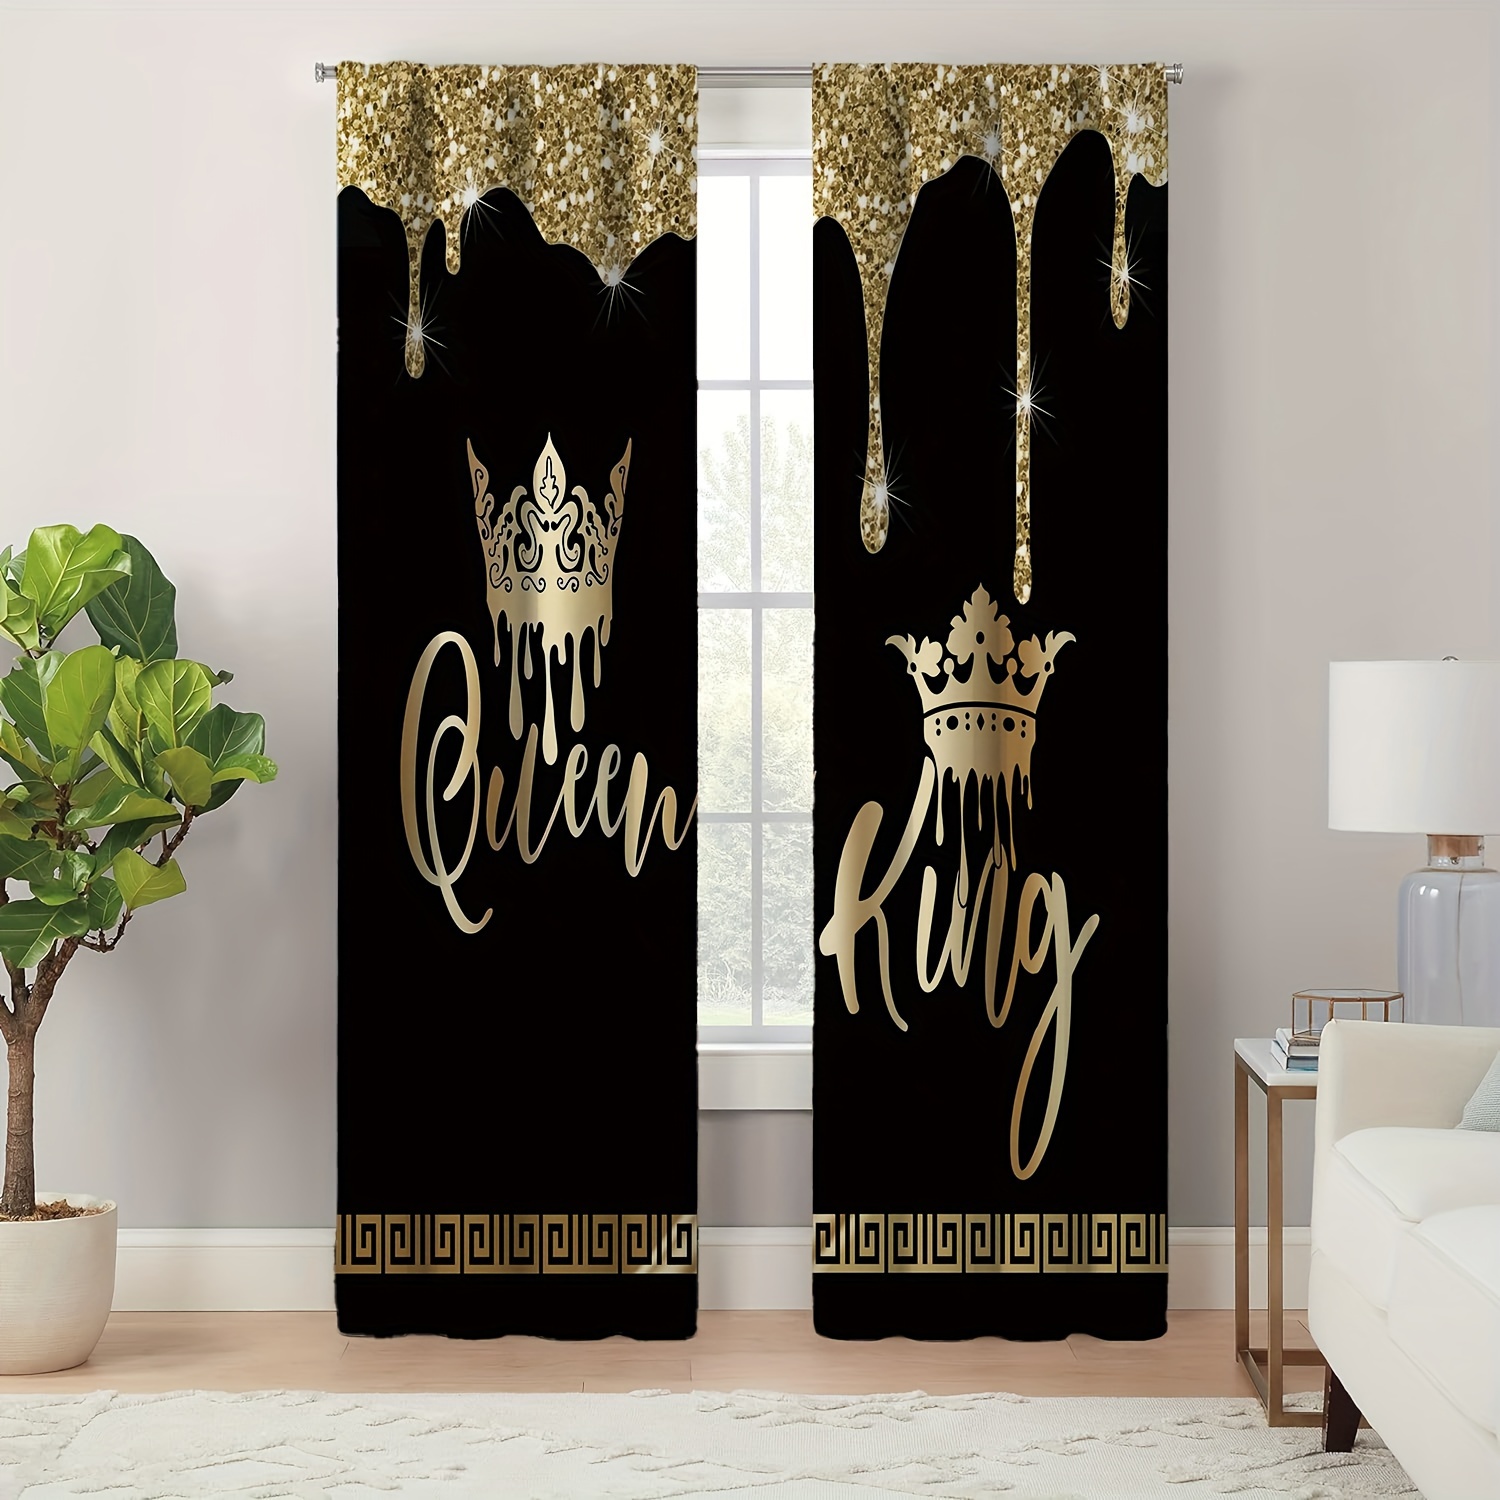 

2-piece Vintage Crown Print Curtain Set - Perfect For Bedroom, Living Room & Office Decor | Machine Washable Polyester With Tieback Design